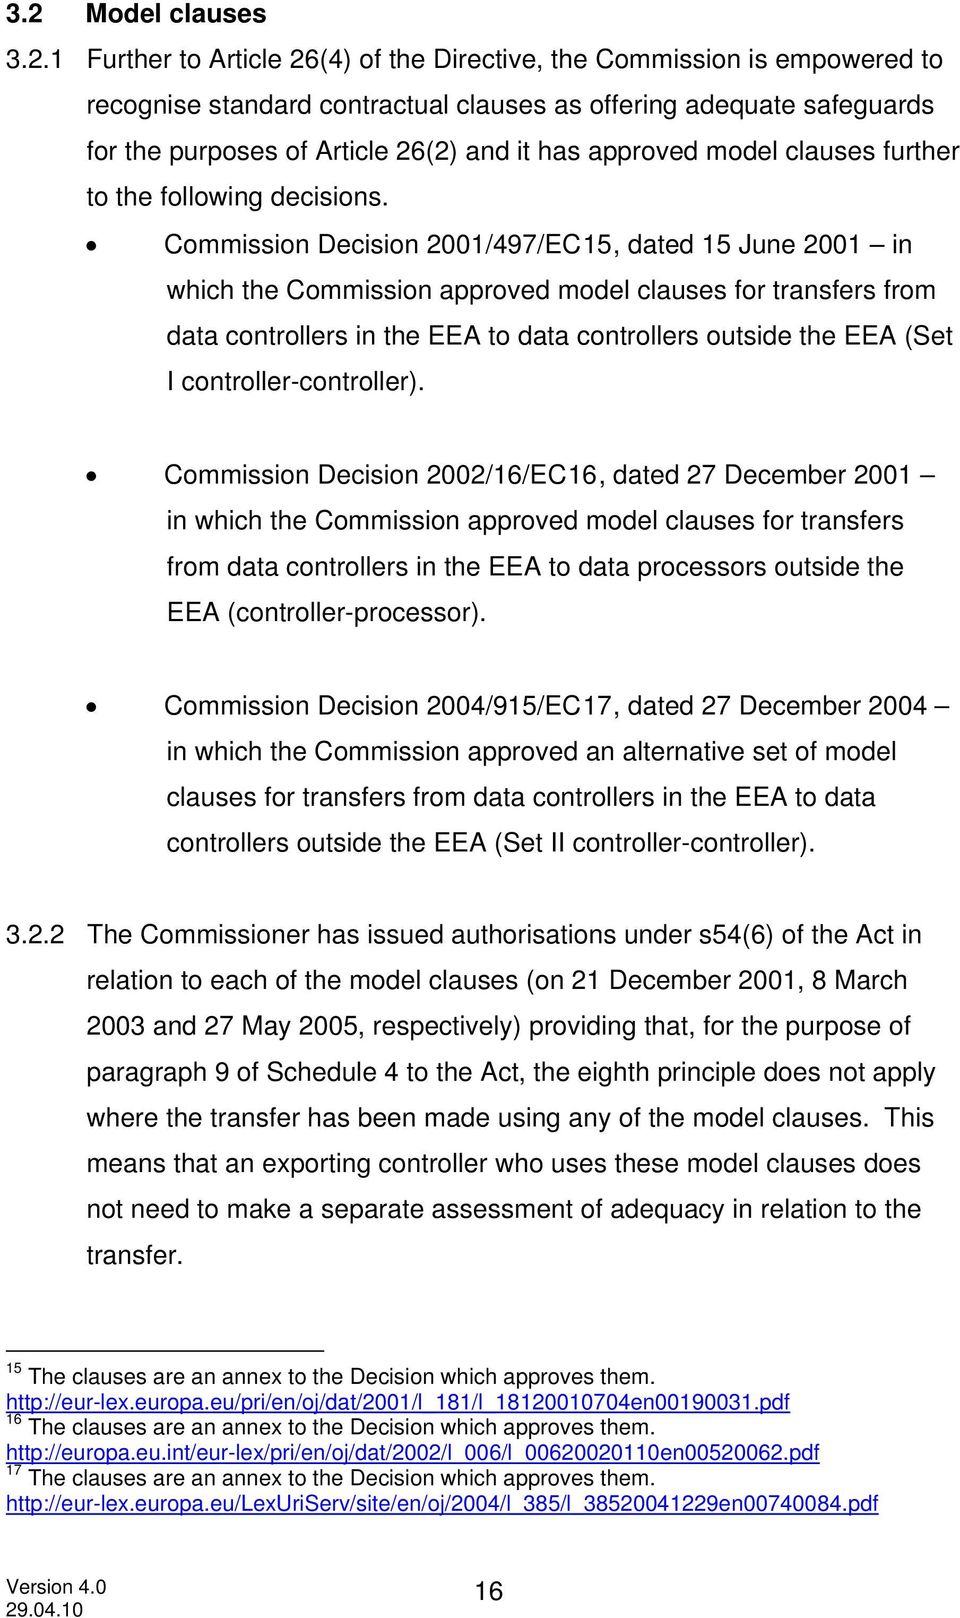 Commission Decision 2001/497/EC15, dated 15 June 2001 in which the Commission approved model clauses for transfers from data controllers in the EEA to data controllers outside the EEA (Set I